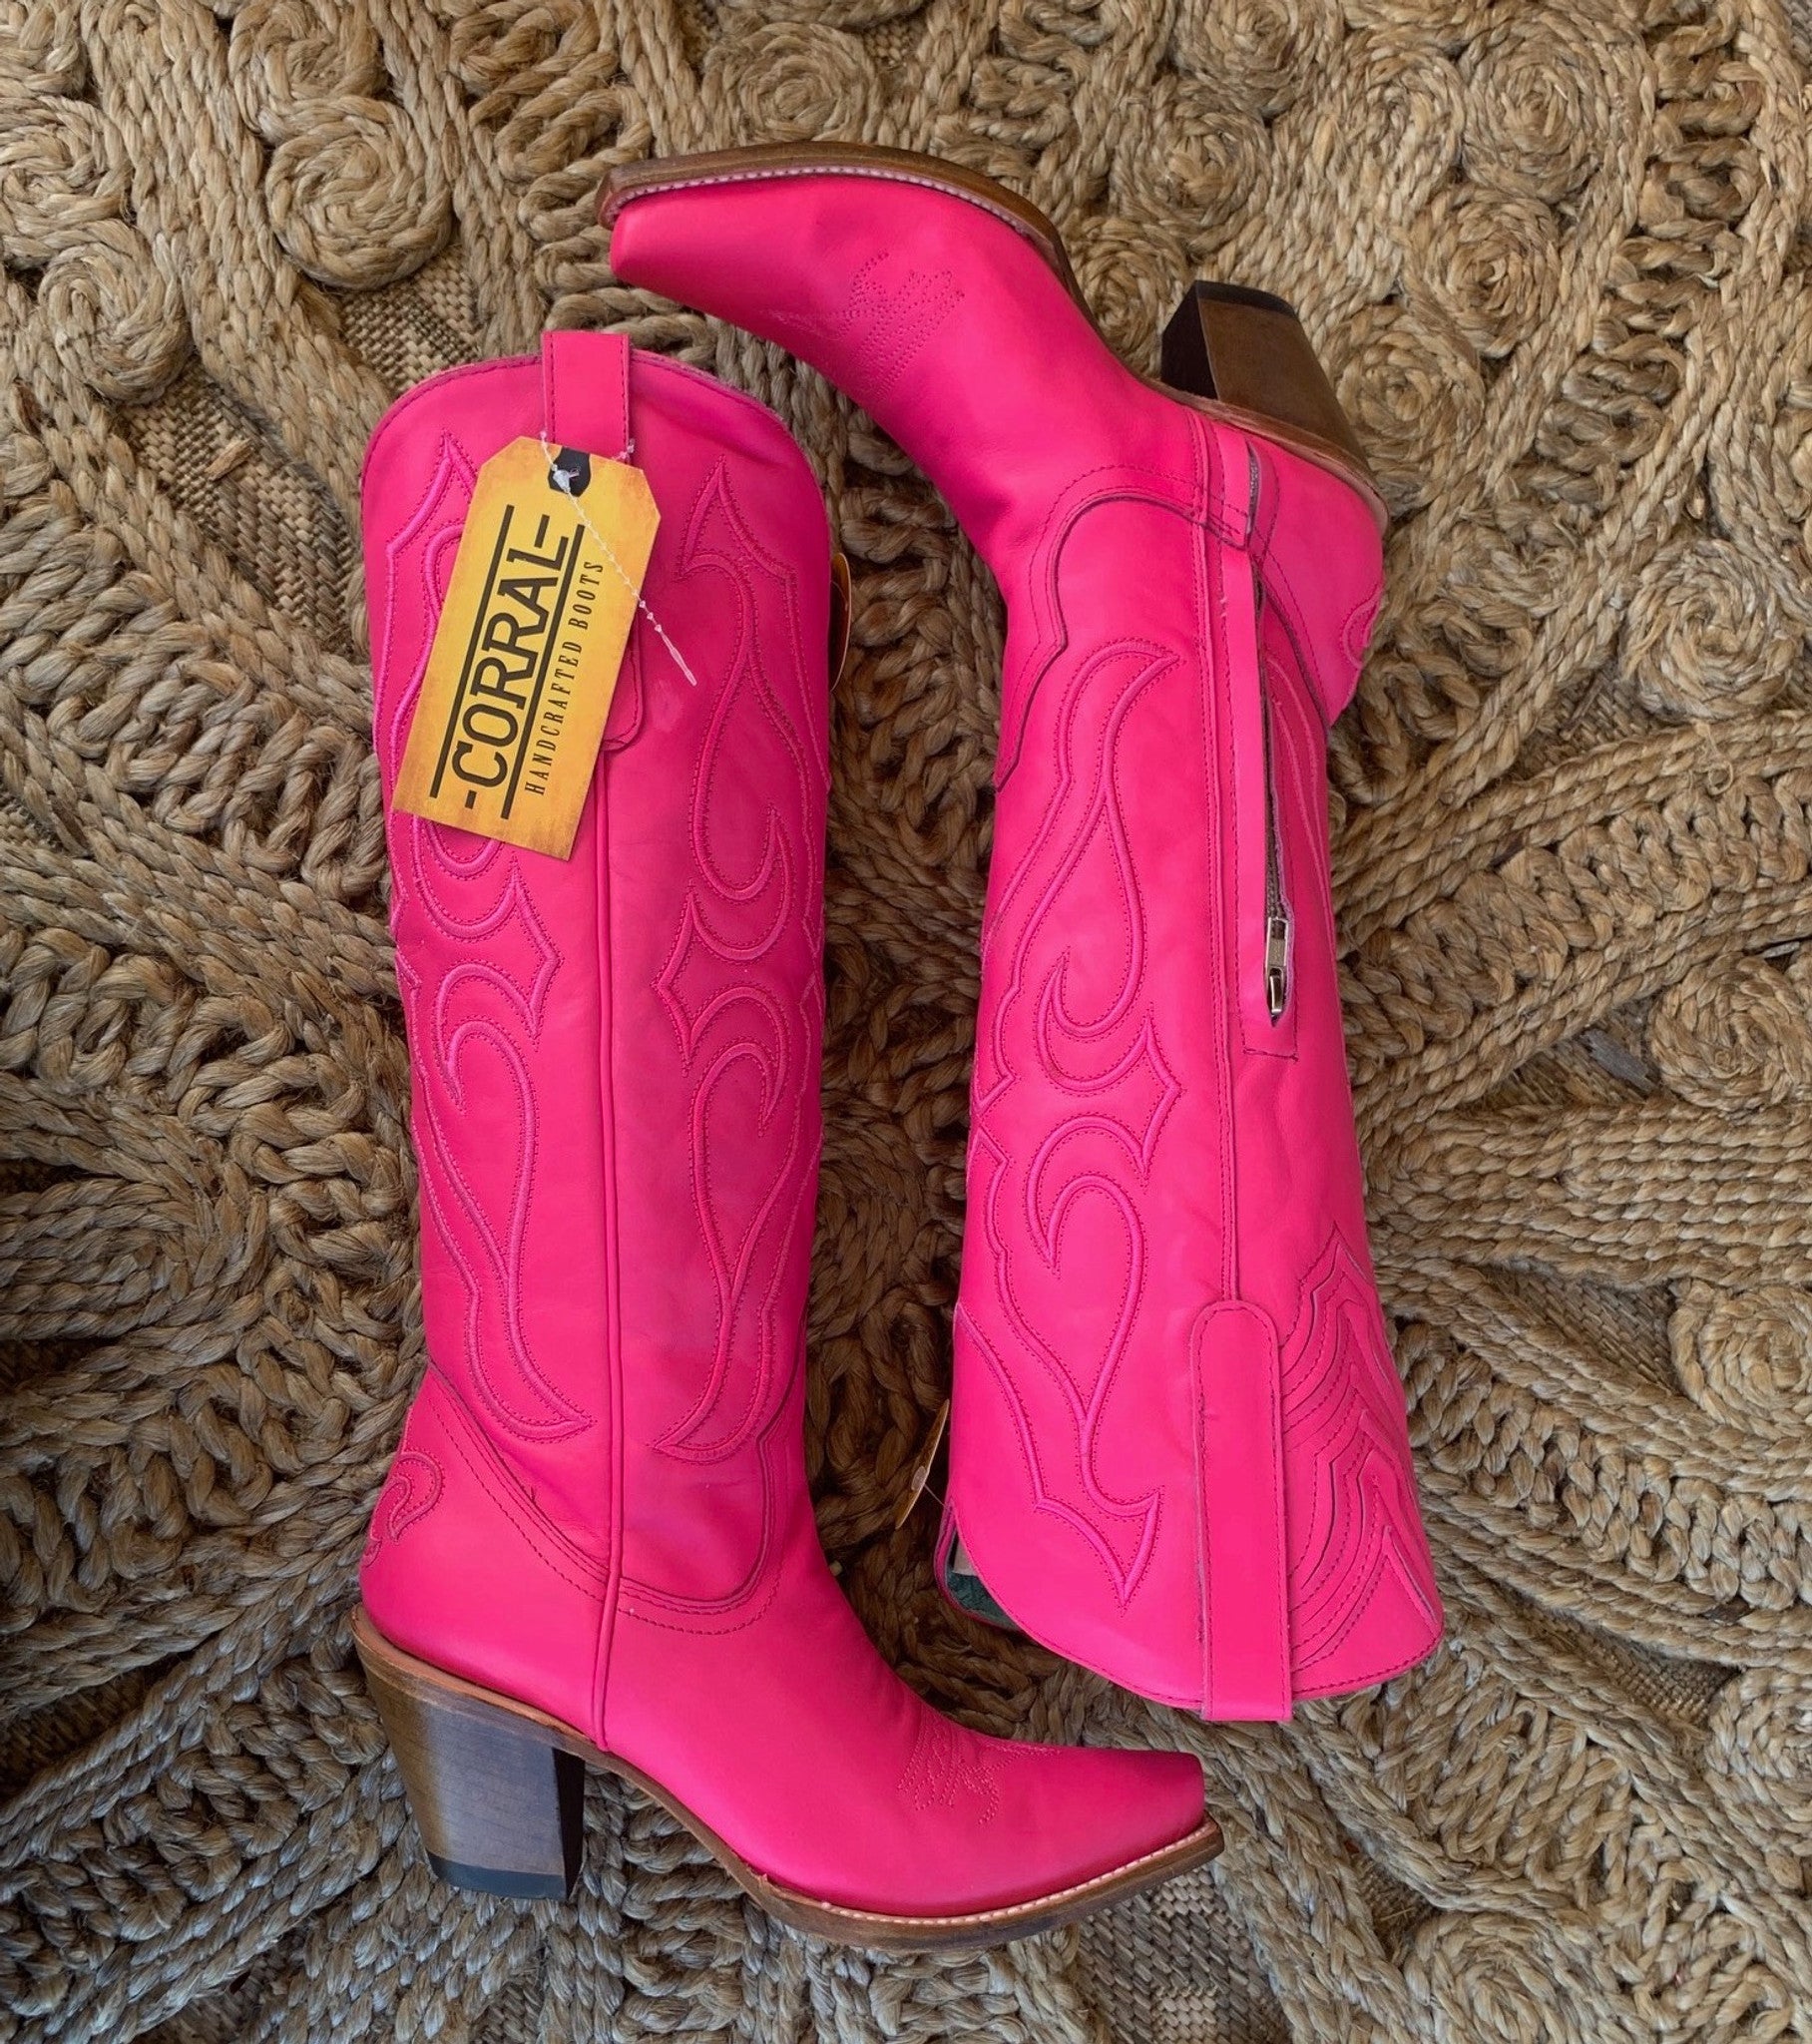 Barbie's Favorite Hot Pink Tall Top Boots by Corral